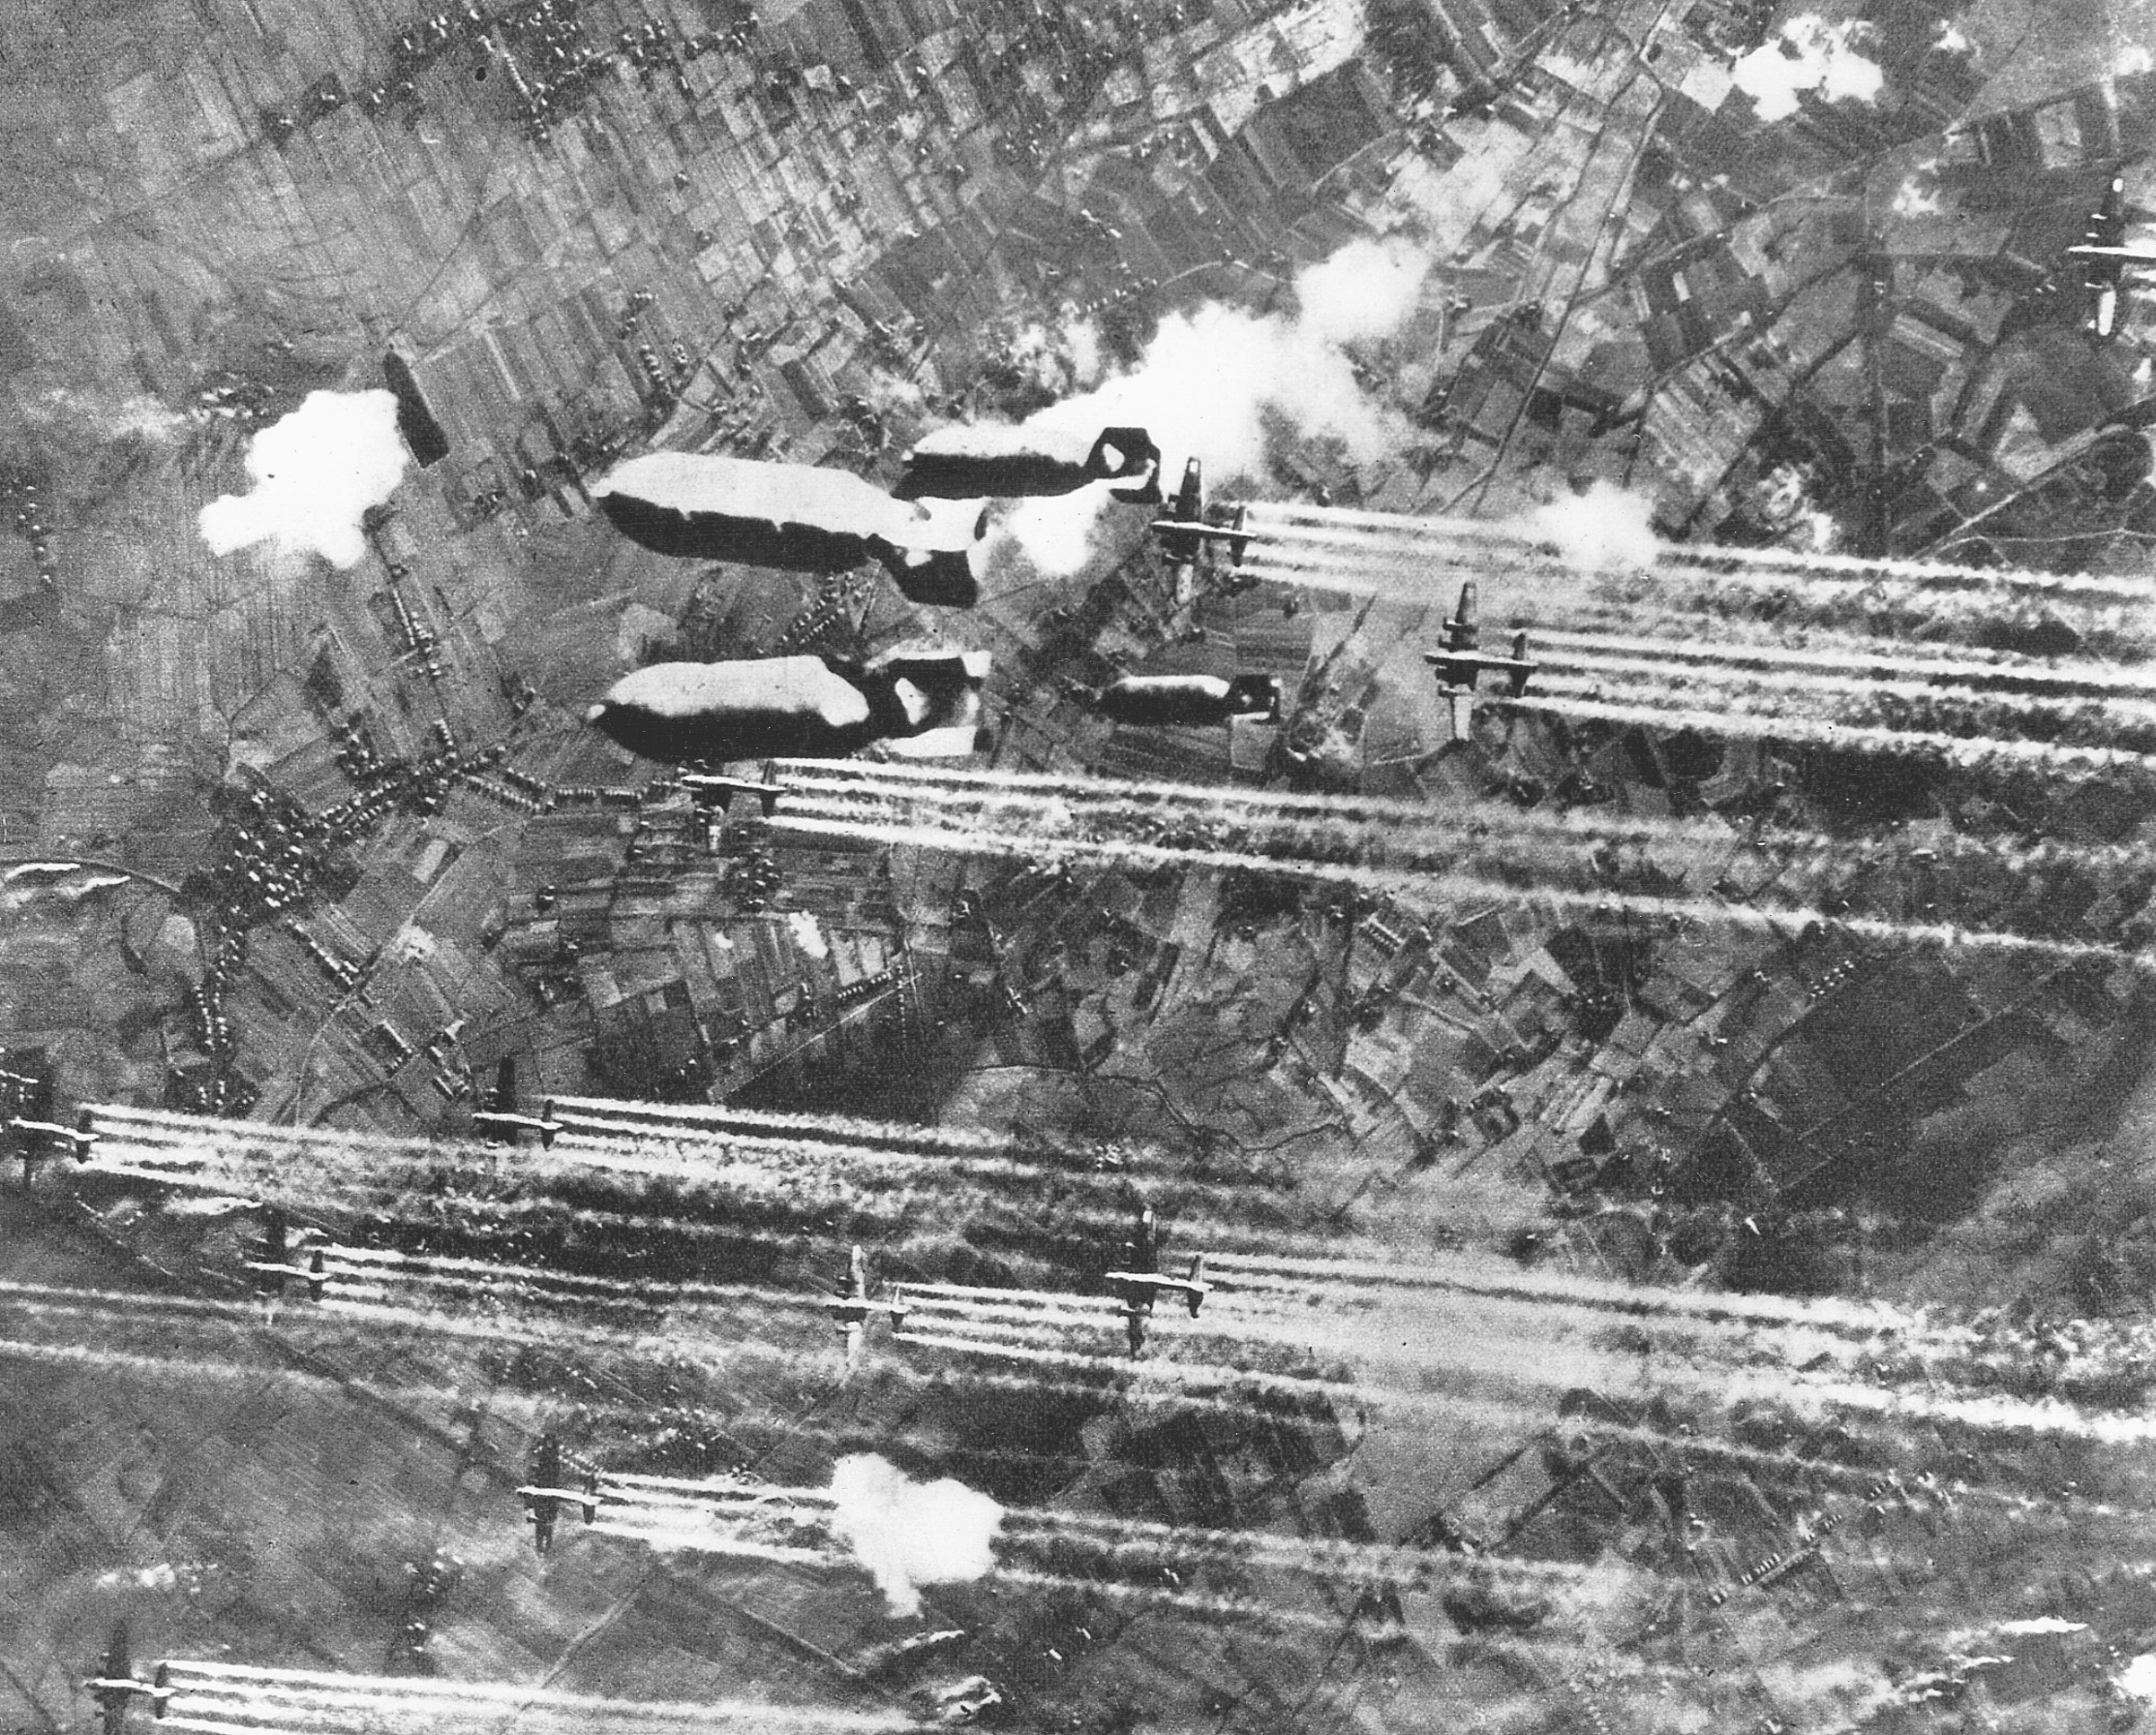 Numerous flak explosions shower U.S. B-17 bombers as they drop a hailstorm of bombs on the Focke-Wulf aircraft factory in Bremen. 